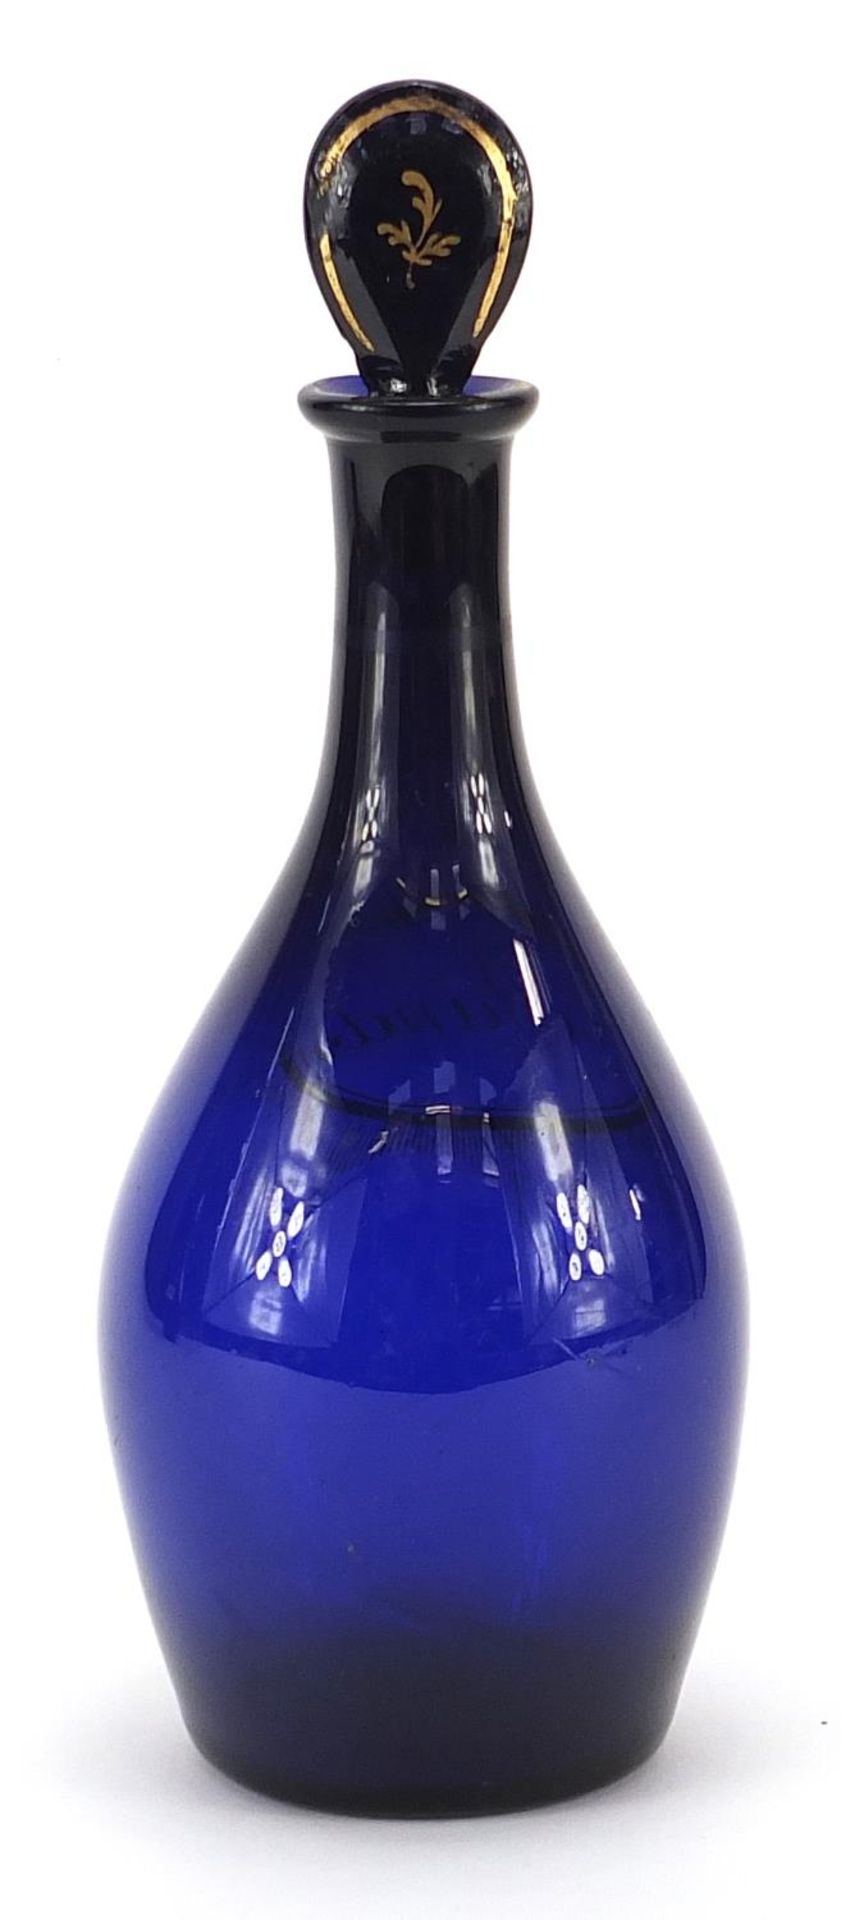 18th/19th century Bristol blue glass decanter with gilt decoration, inscribed Hollands, 23cm high - Image 2 of 3